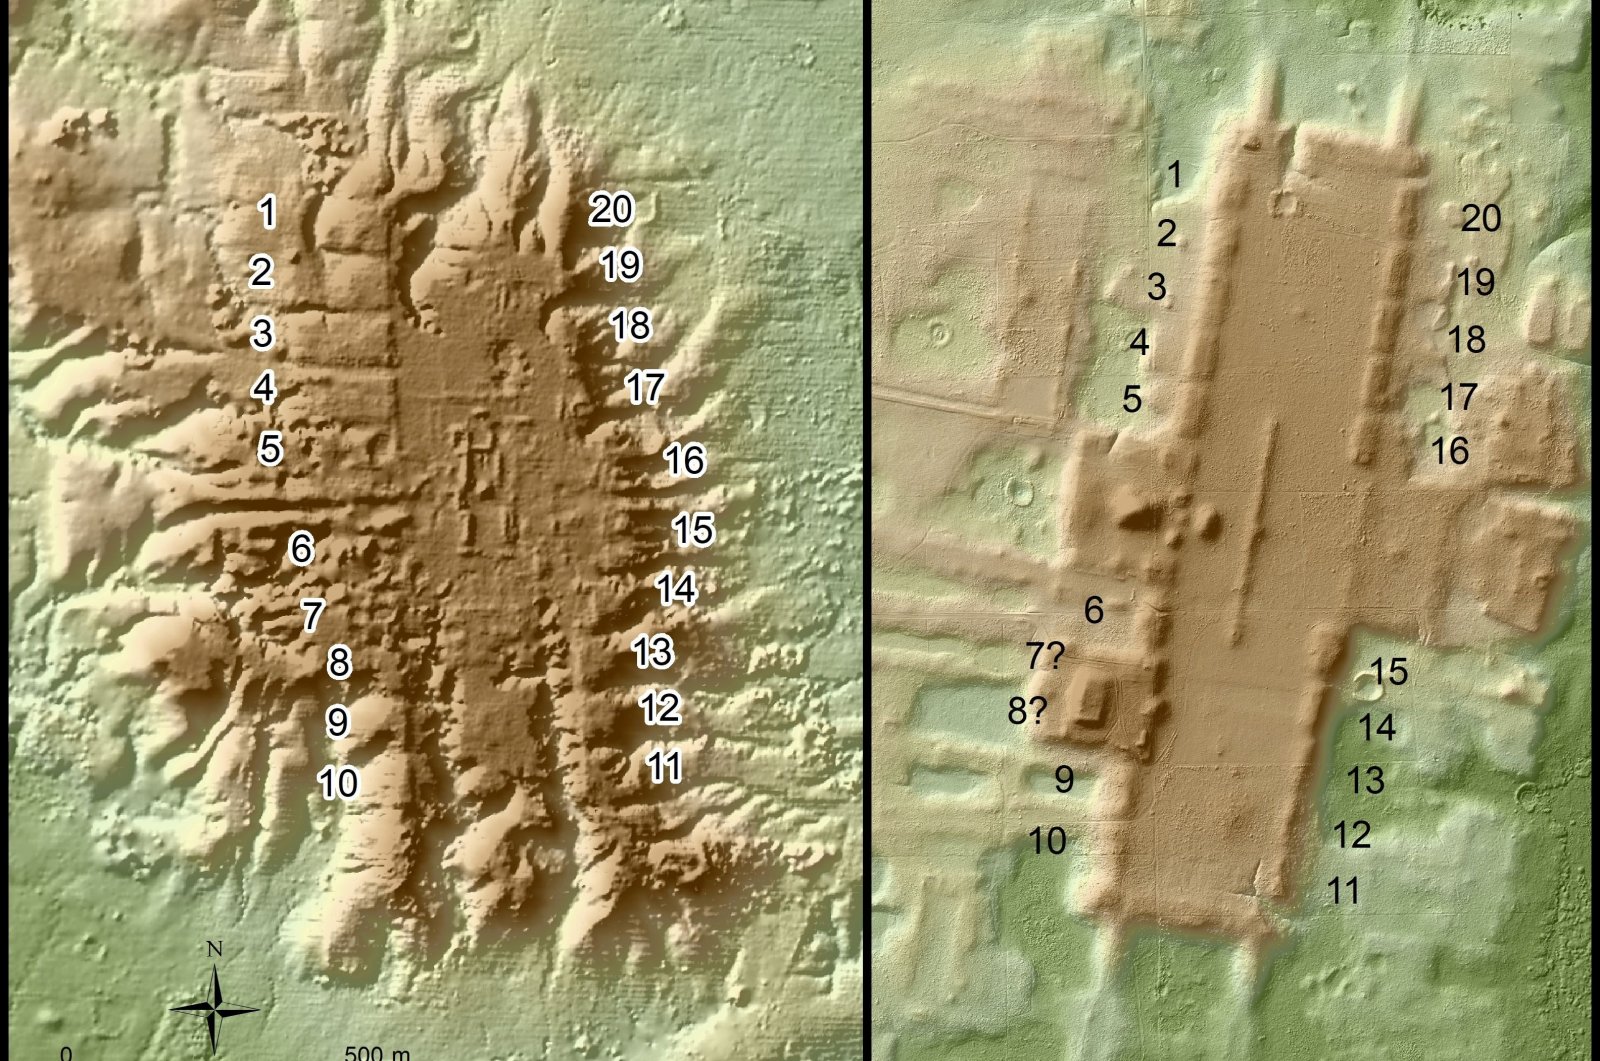 A lidar-based aerial view from June 2021 of the ancient Olmec site of San Lorenzo (L) in Mexico's Veracruz state and the Preclassic site of Aguada Fenix in Mexico's Tabasco state in the western Maya area, with newly identified structures numbered, are seen in this handout image. (Takeshi Inomata/Handout via Reuters)